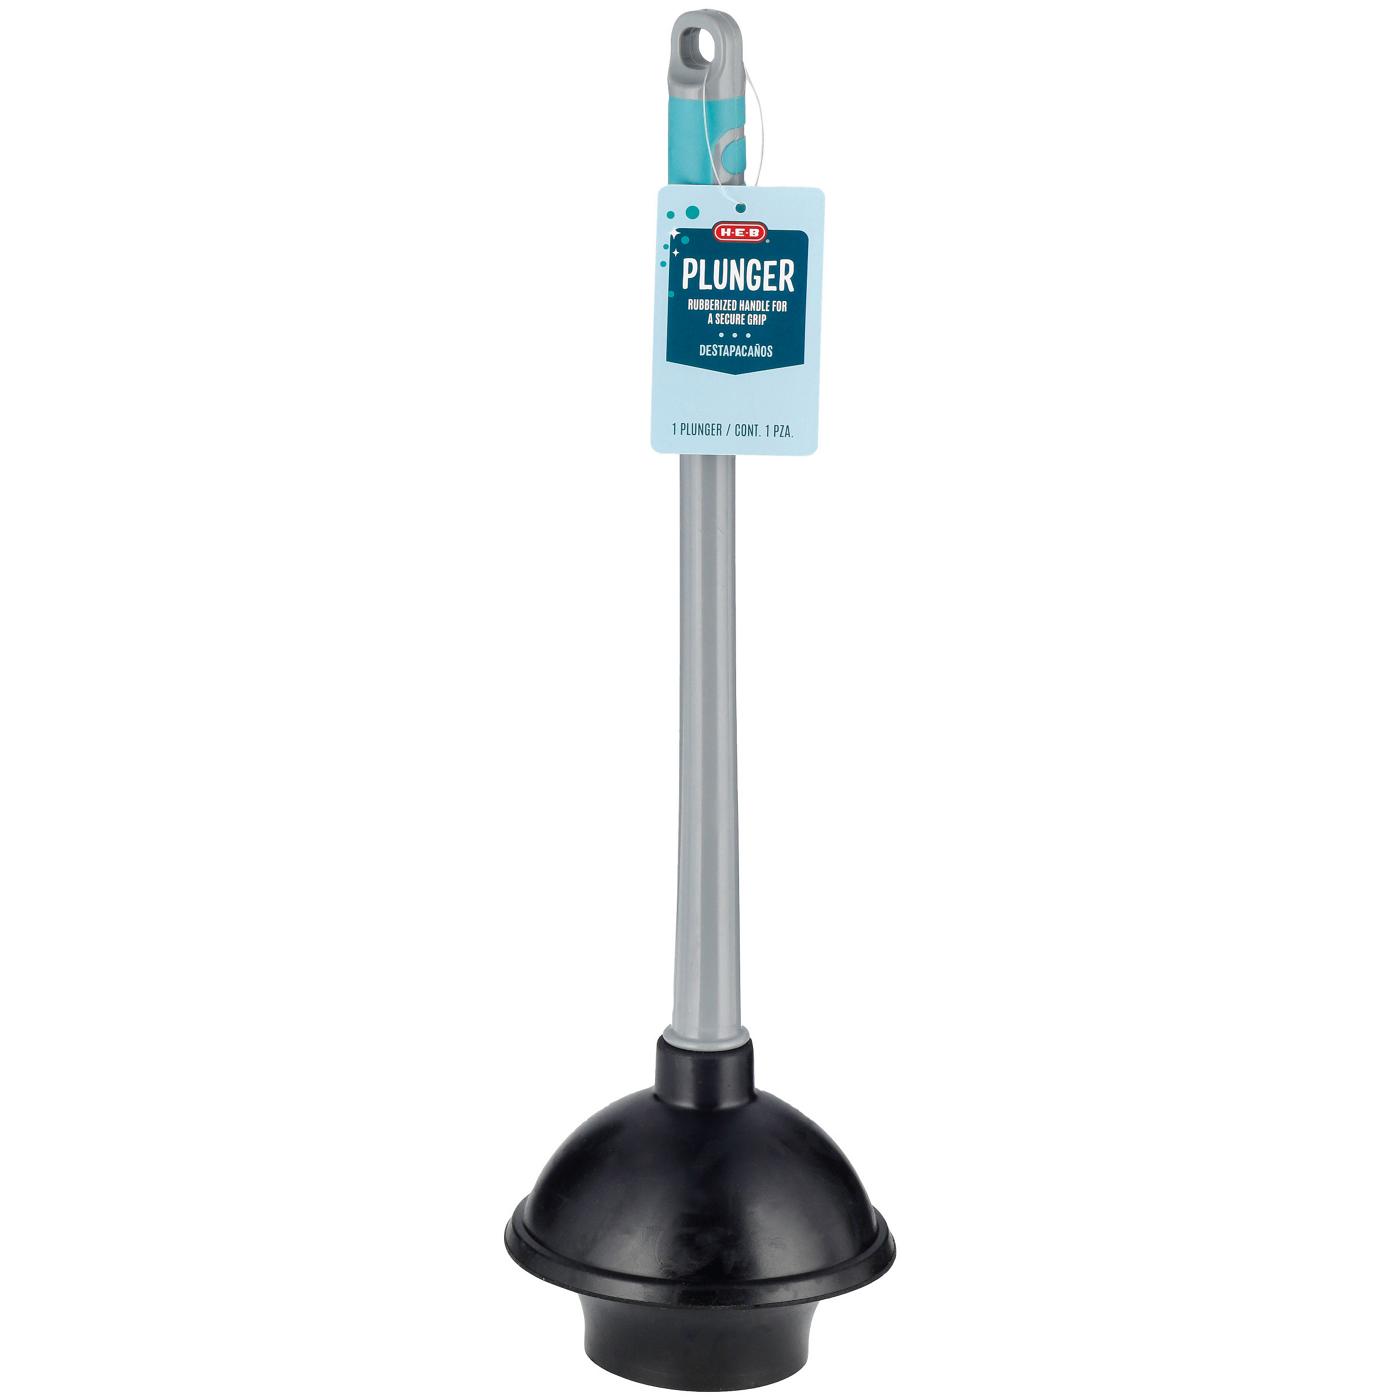 H-E-B Plunger; image 2 of 2